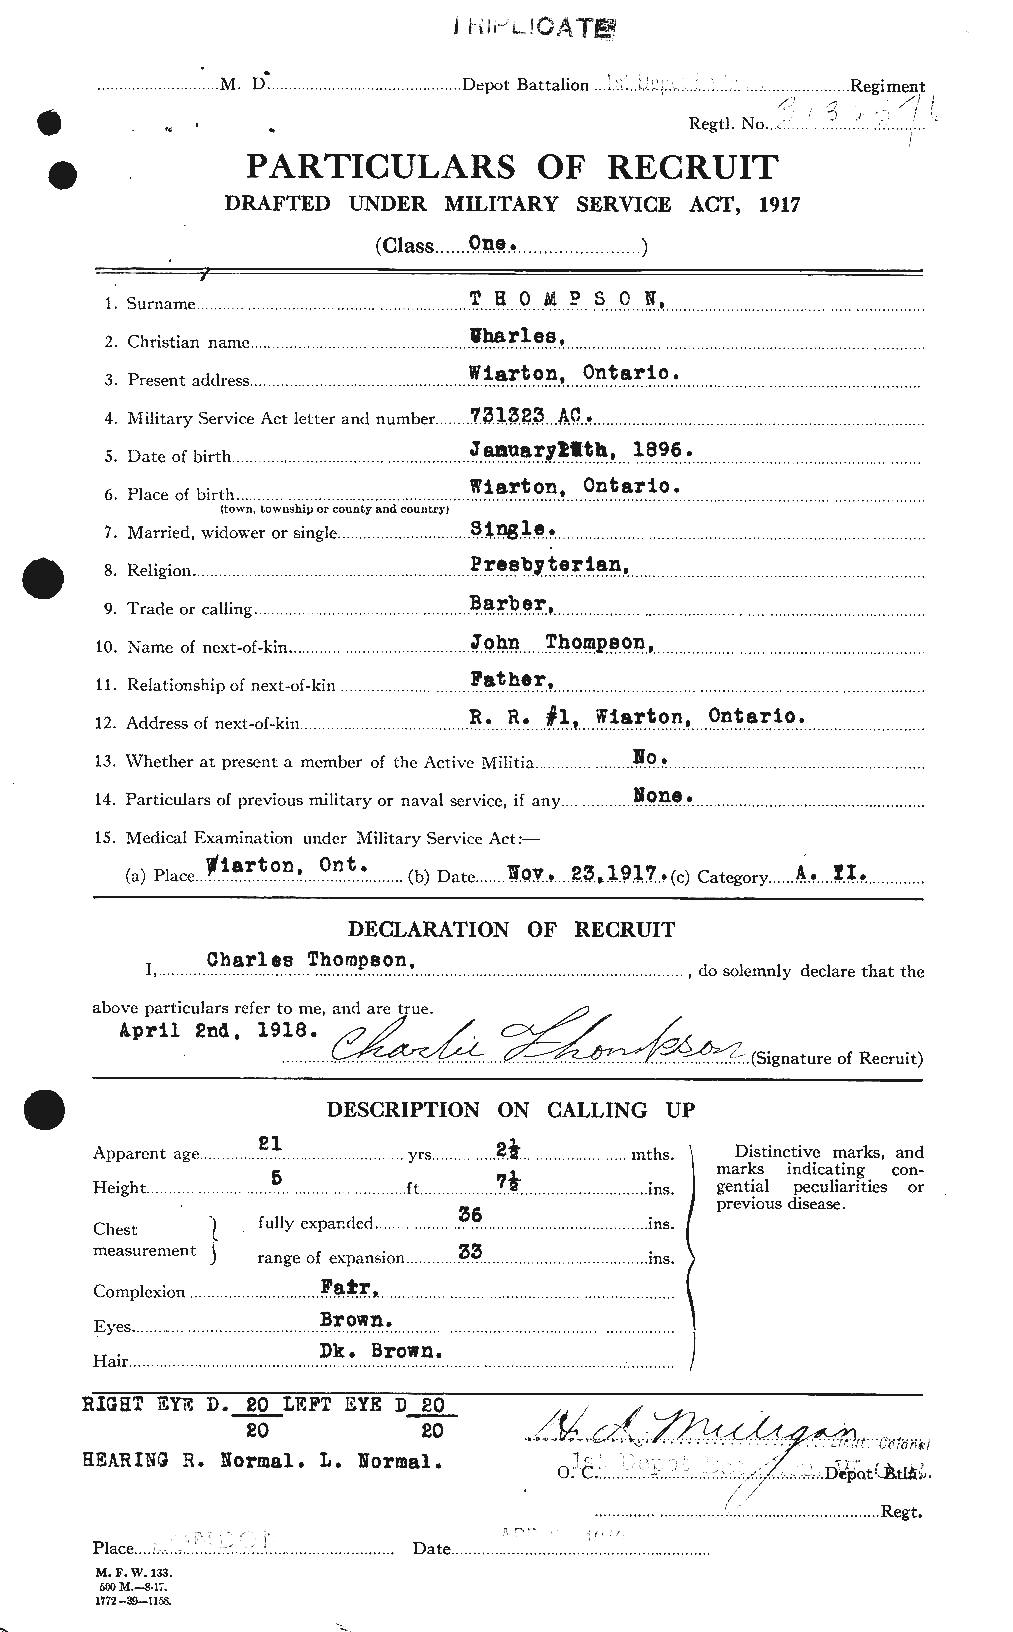 Personnel Records of the First World War - CEF 630354a